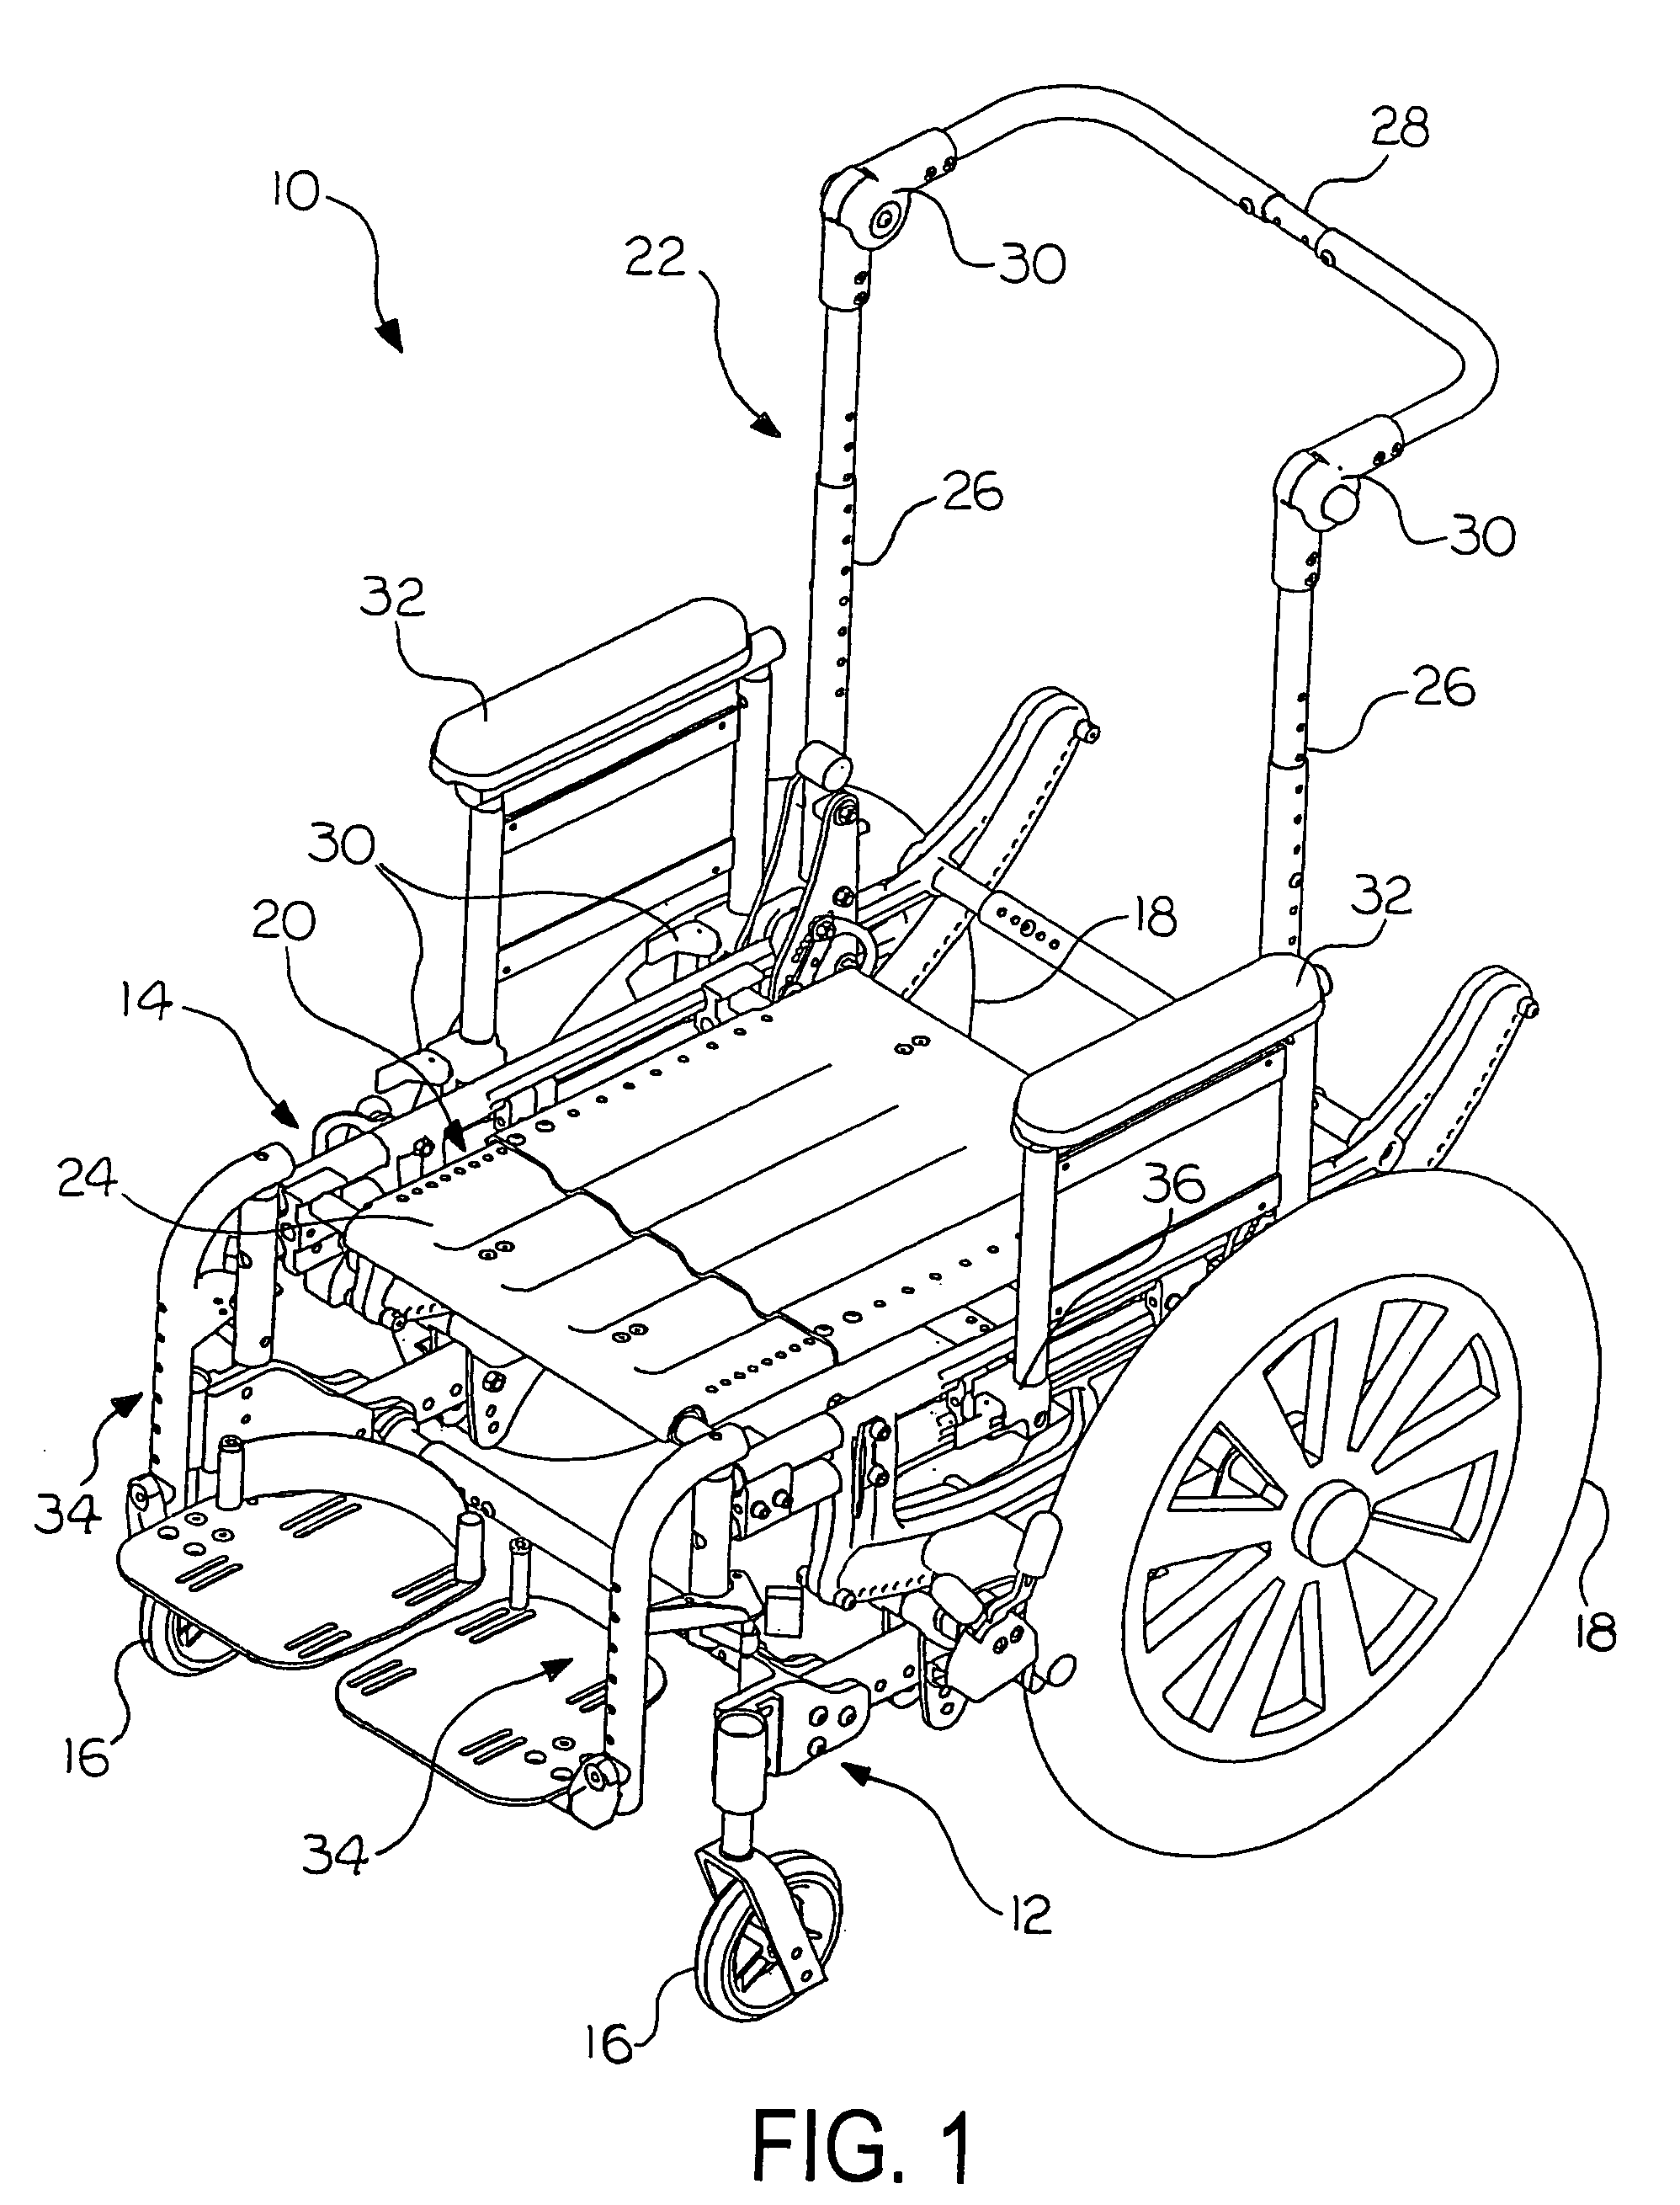 Personal mobility vehicle with tiltable seat